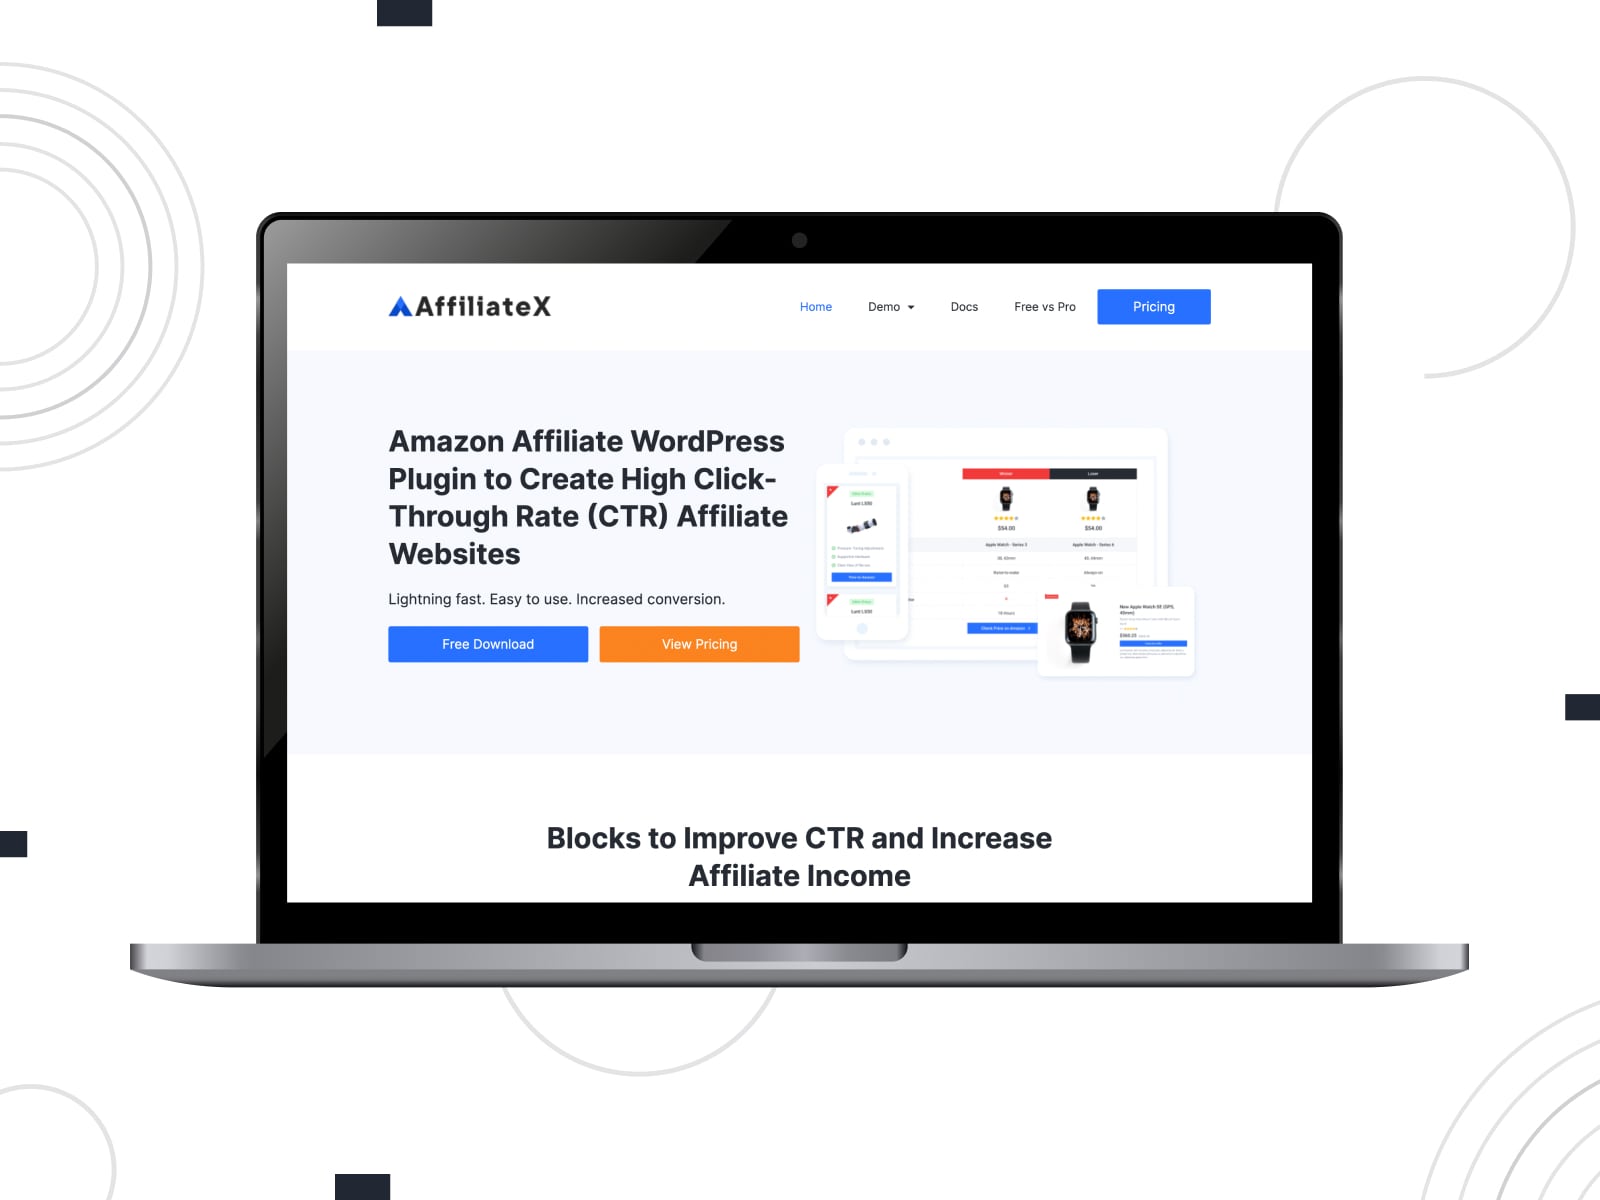 Illustration of AffiliateX, an affiliate WordPress plugin for Amazon sellers with 10 pre-defined pricing blocks.